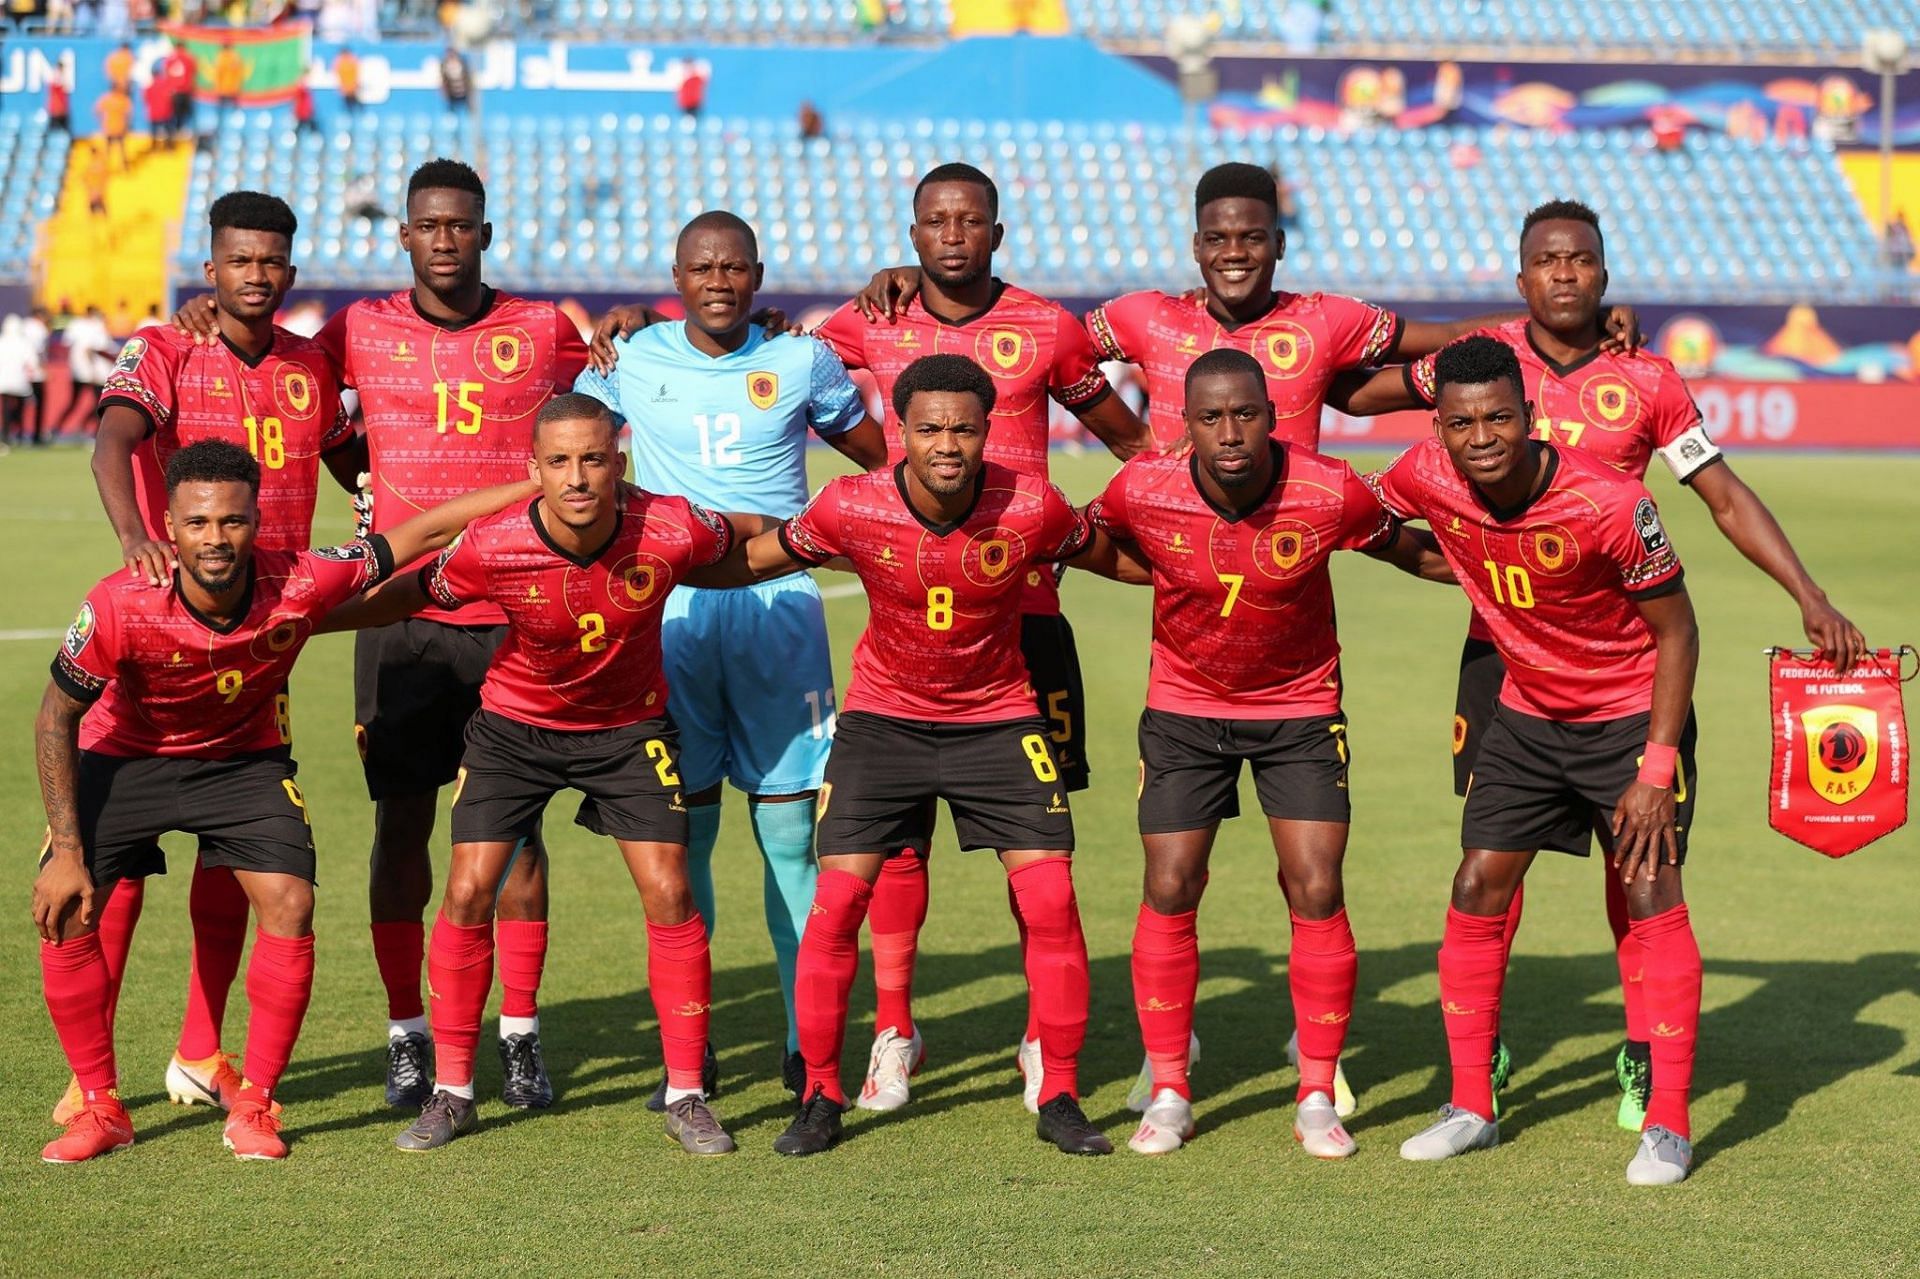 Angola kick start their COSAFA Cup campaign against Mozambique on Friday